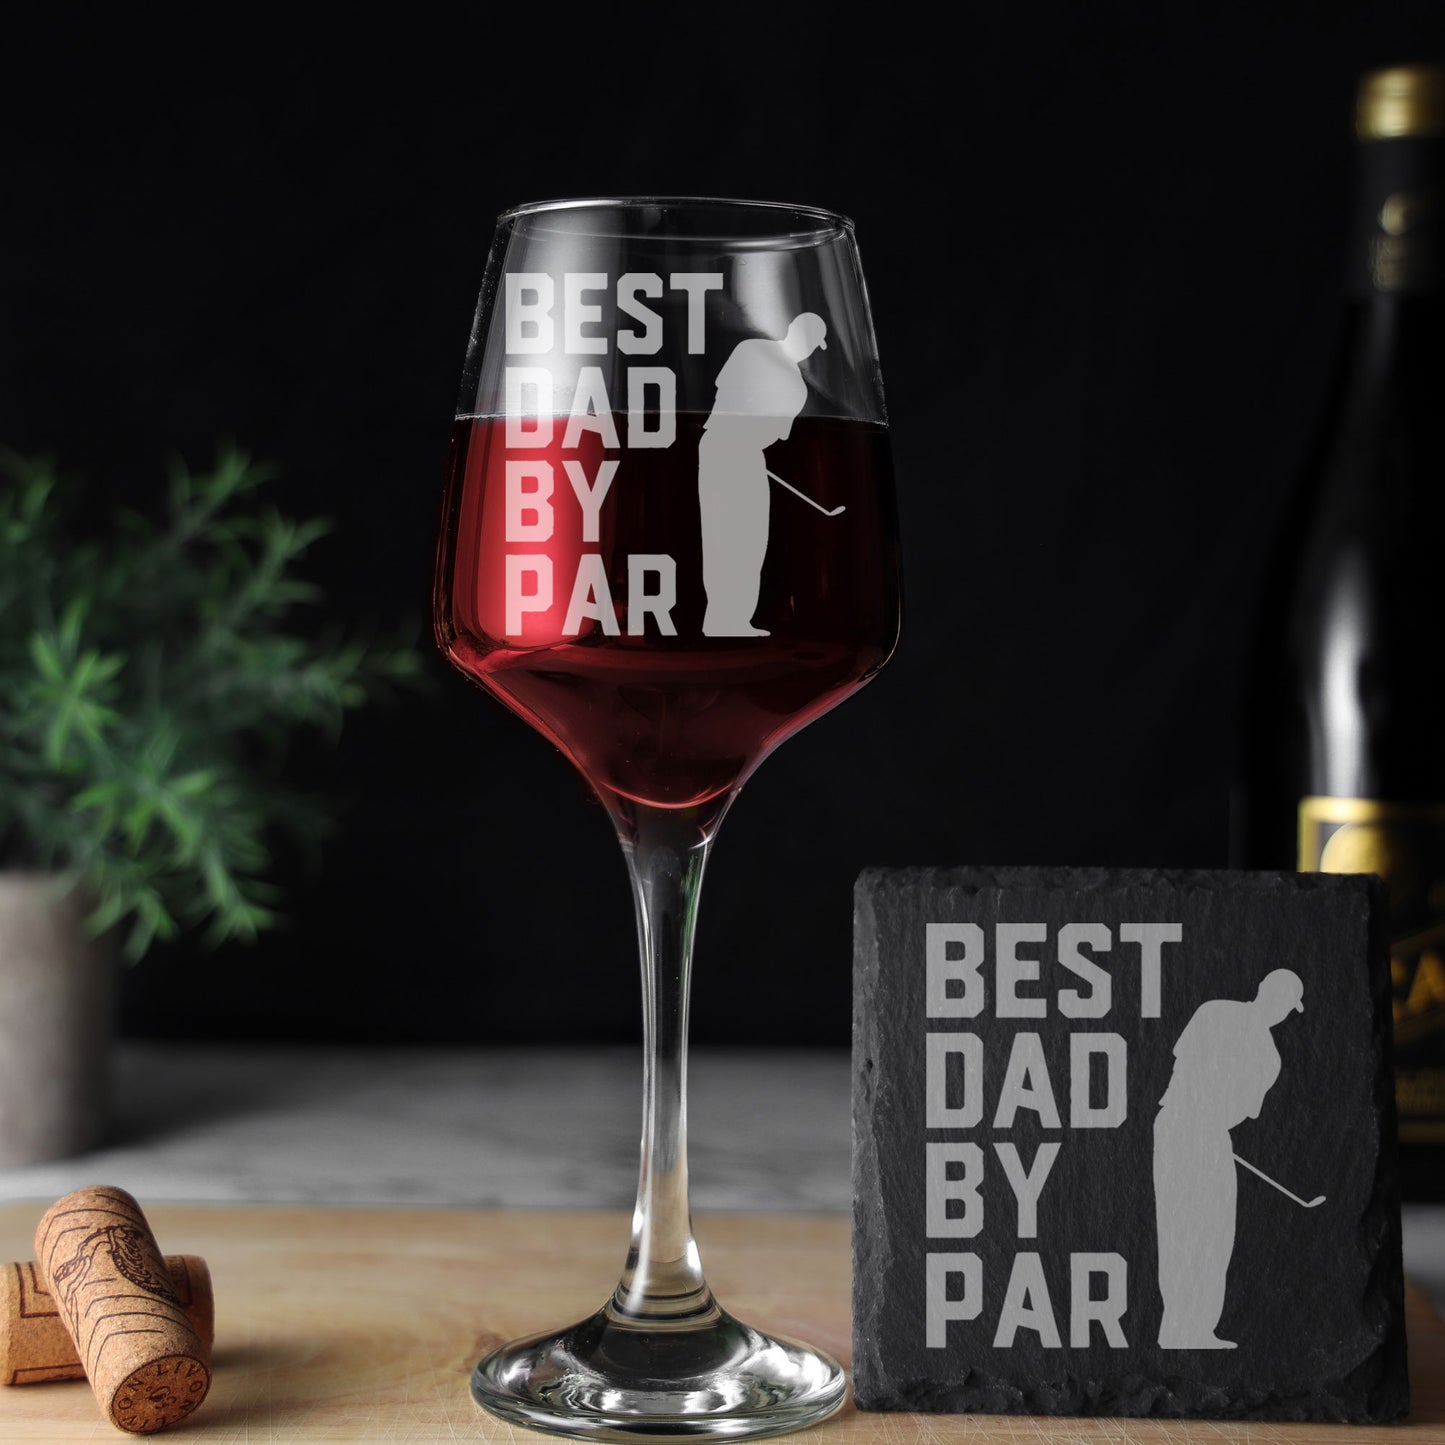 Best Dad By Par Engraved Wine Glass and/or Coaster Set  - Always Looking Good - Glass & Square Coaster Set  